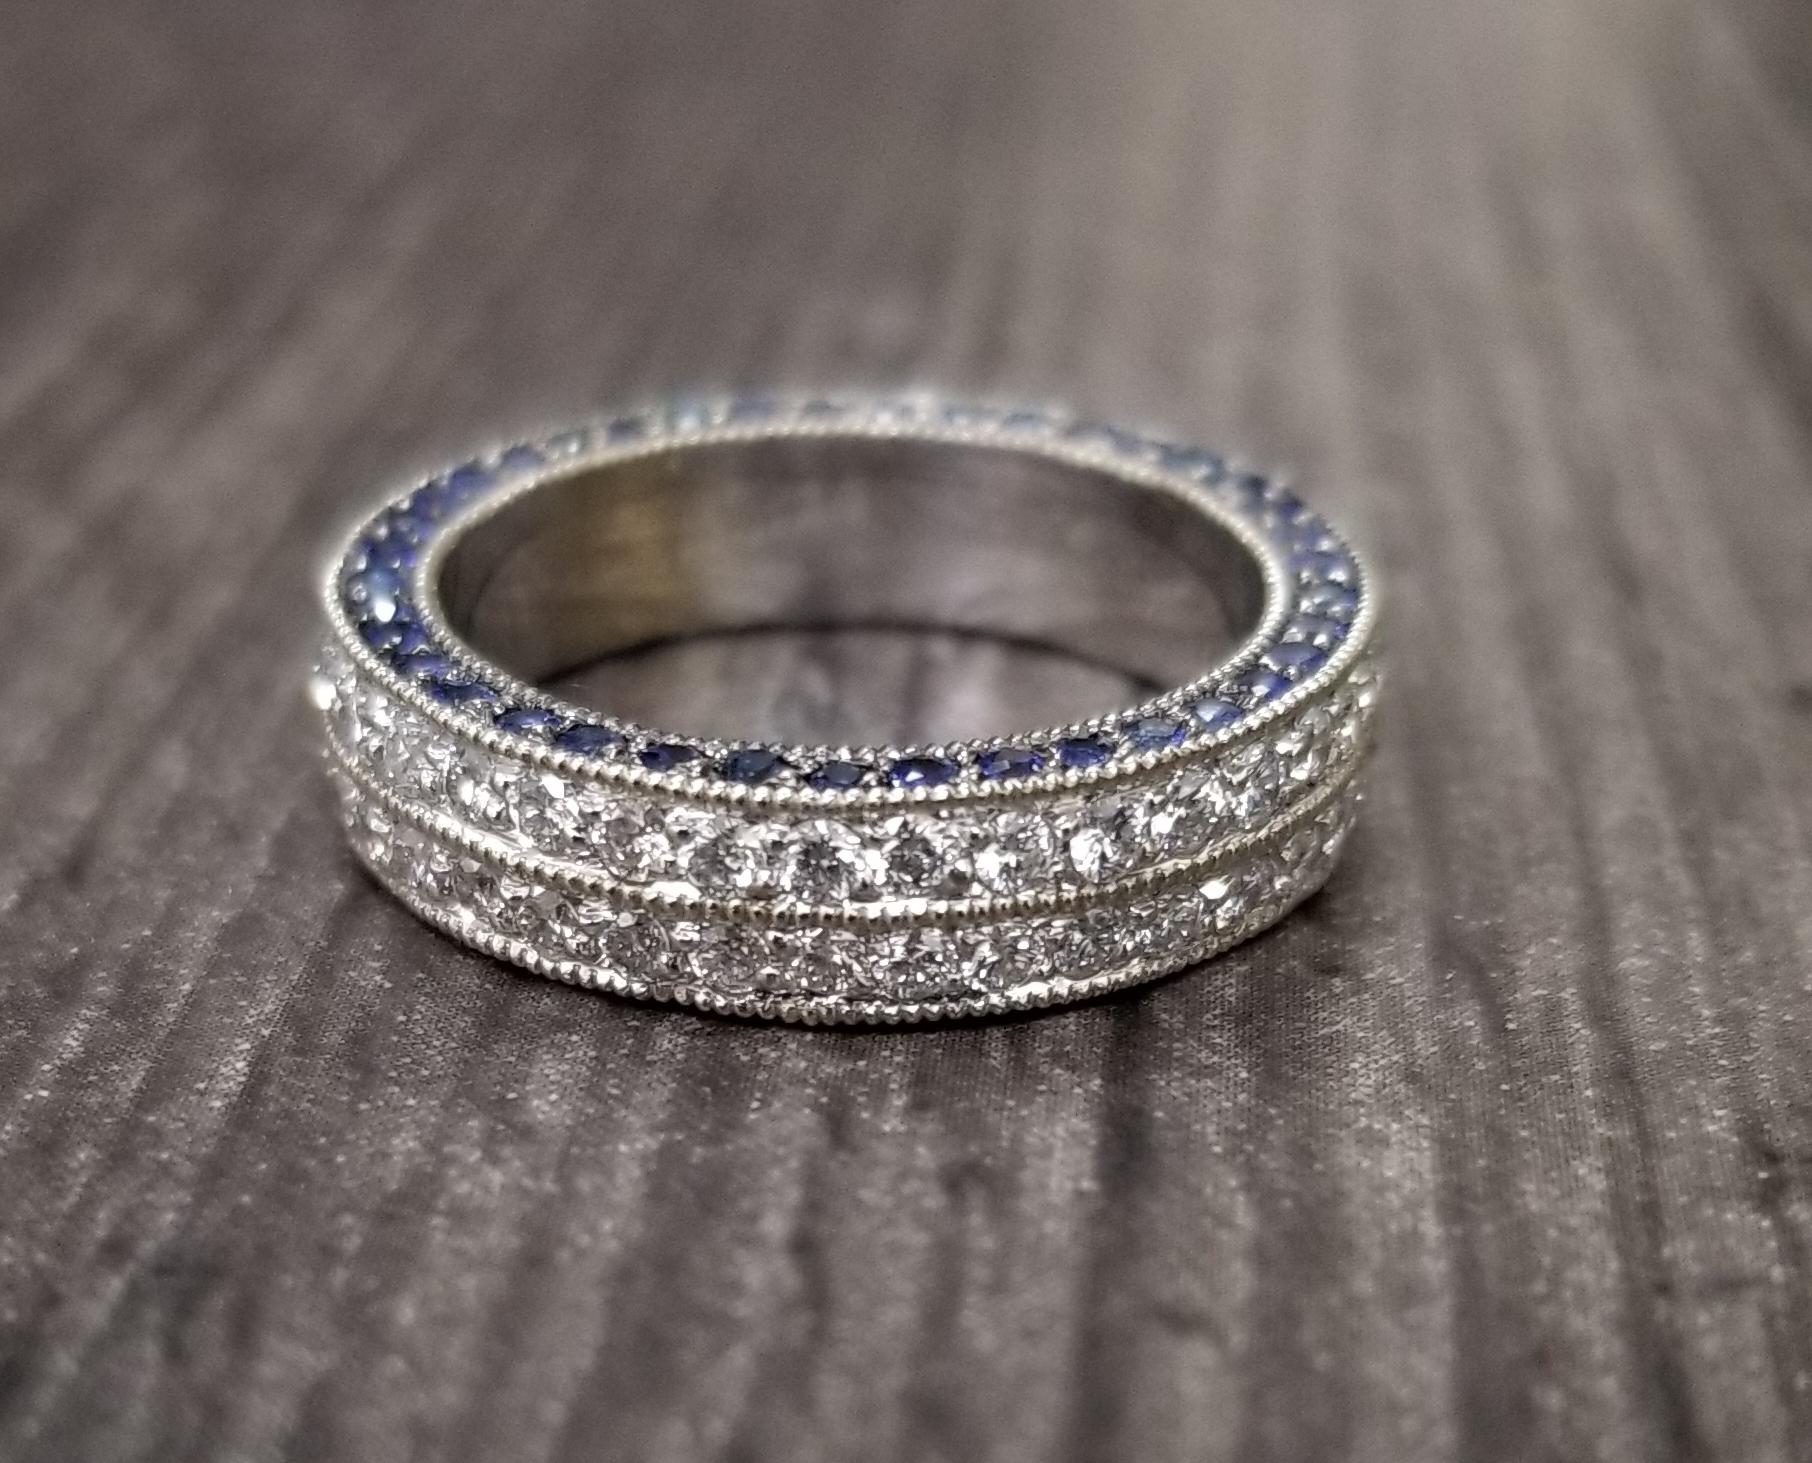 14k white gold ladies 2 row diamond pave eternity ring with sapphires pave in the side of the ring, containing 72 round full cut diamonds of very fine quality weighing 1.10cts. and 78 round blue sapphires weighing 1.00cts. ring size is 6, a new ring